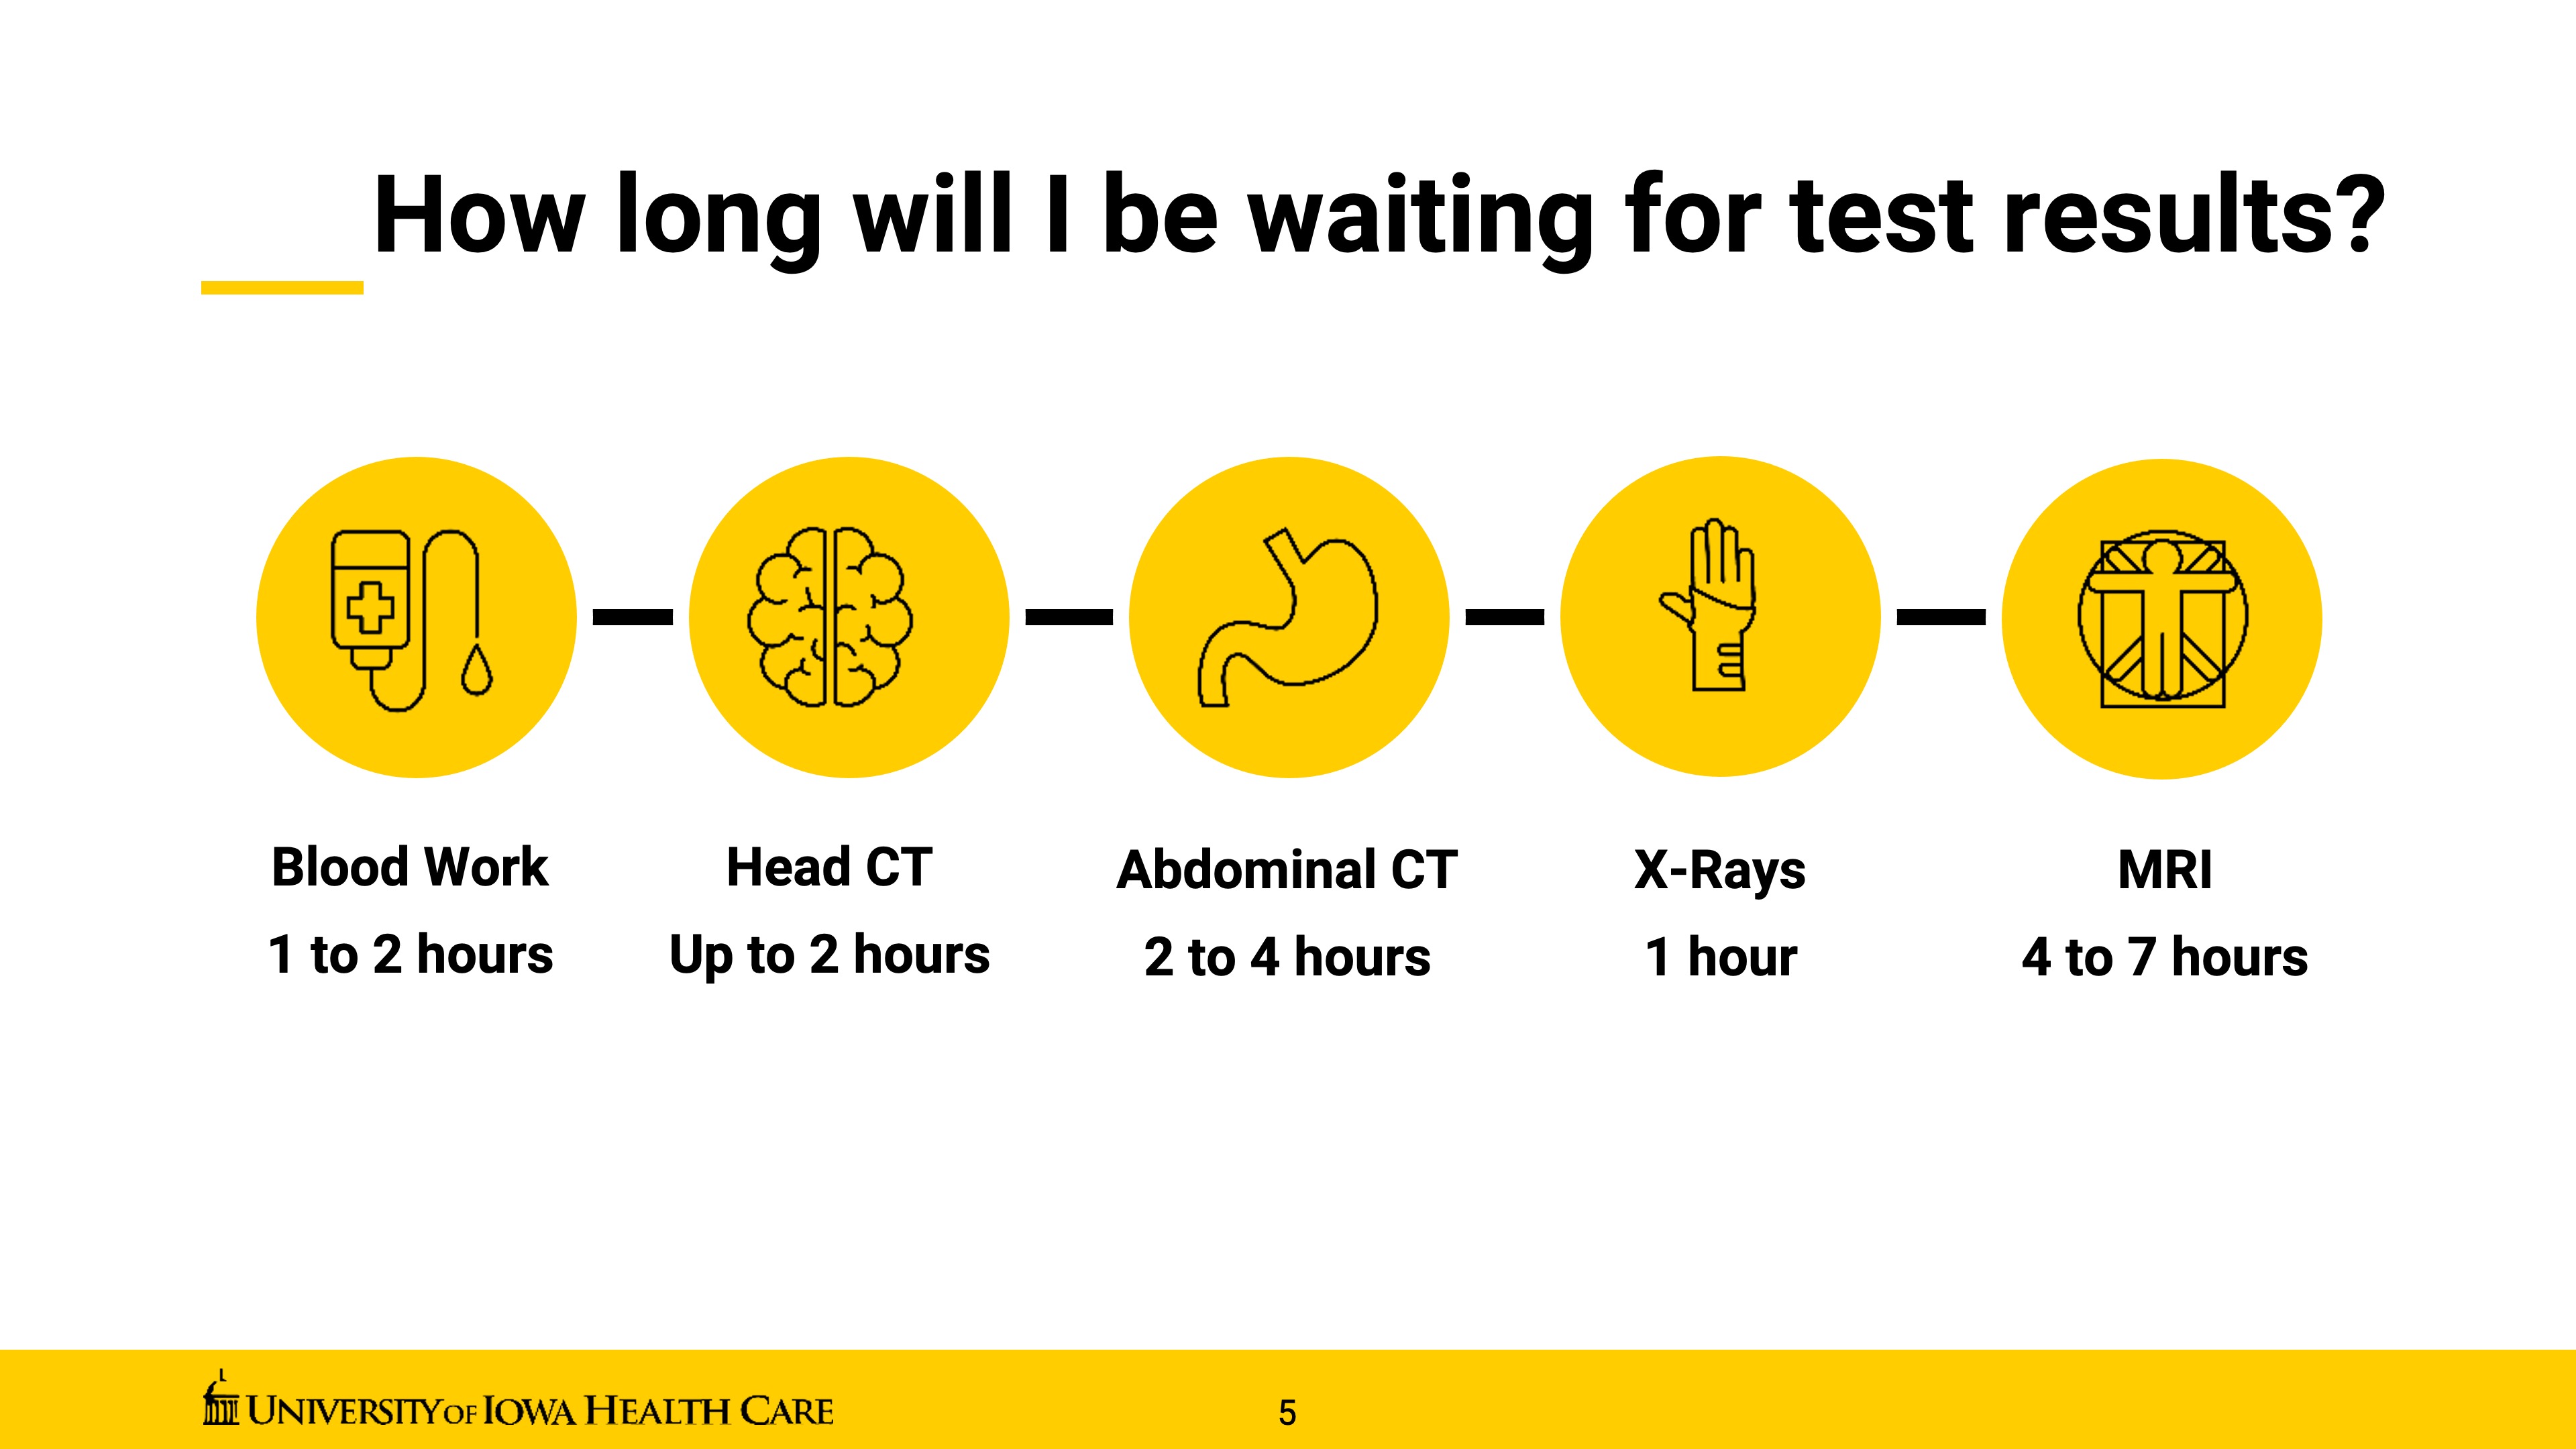 How long will I be waiting for test results?